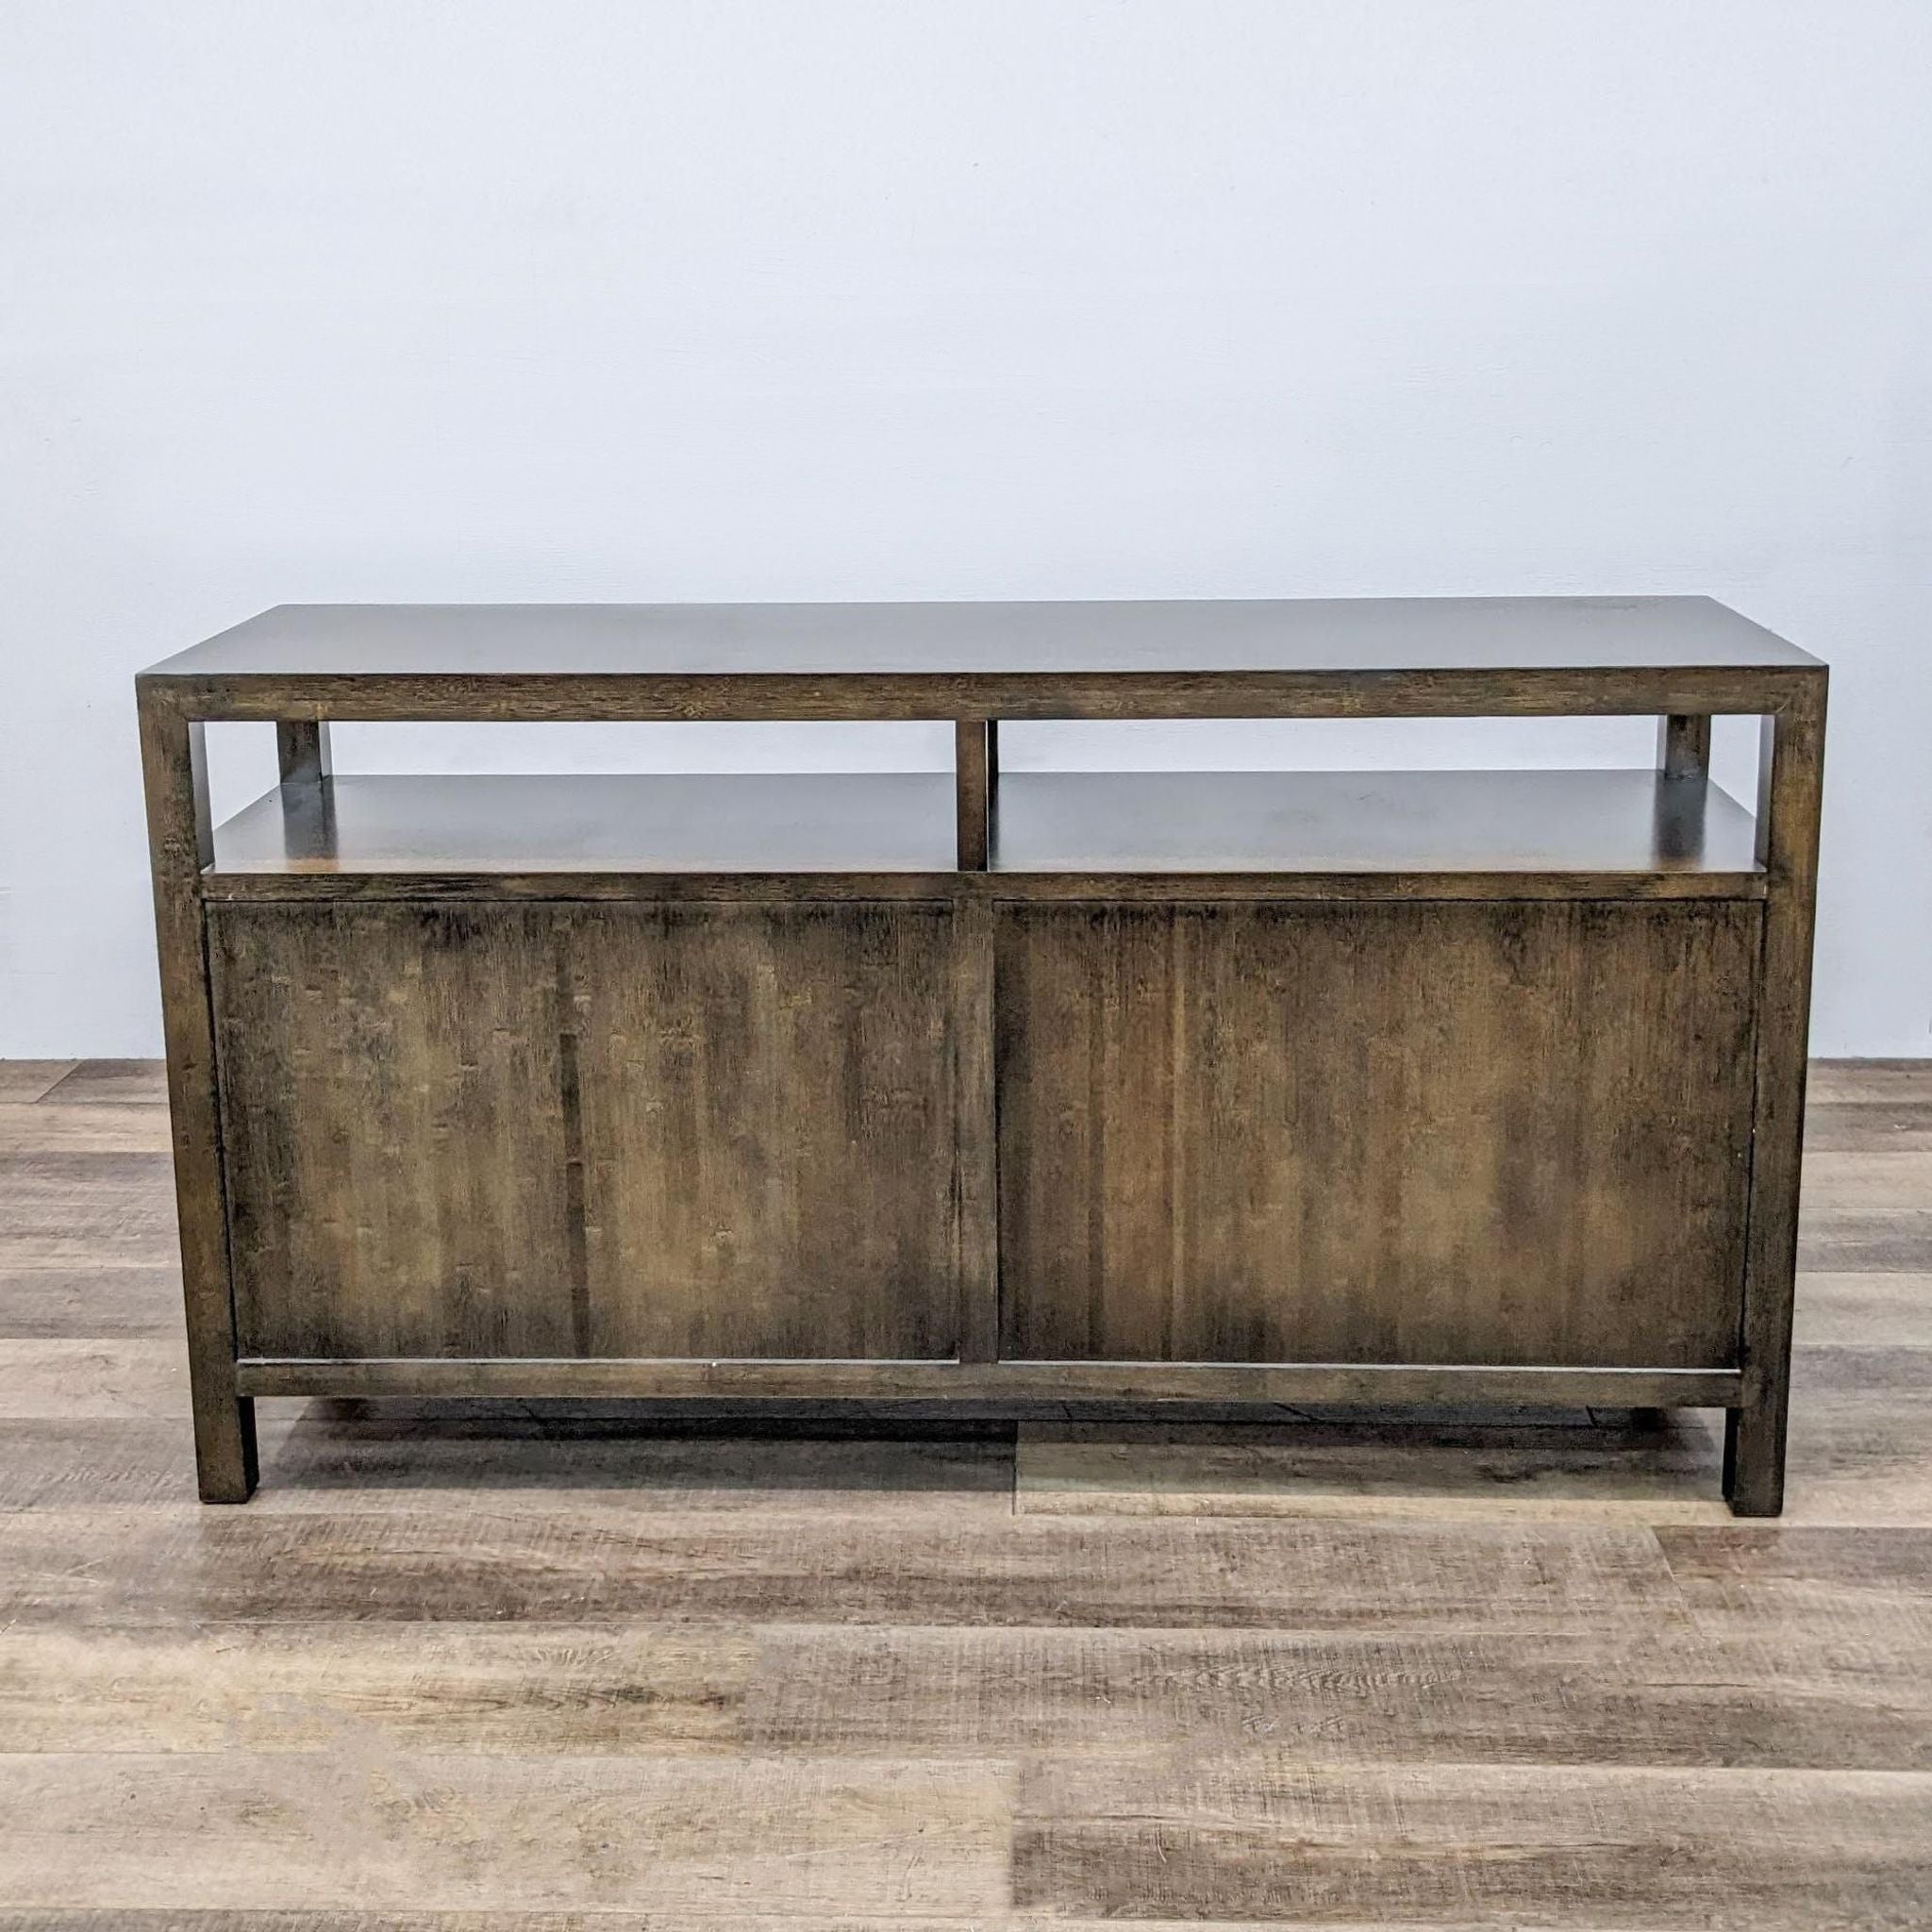 Crate & Barrel wooden entertainment center with glass shelves on a wood-patterned floor.